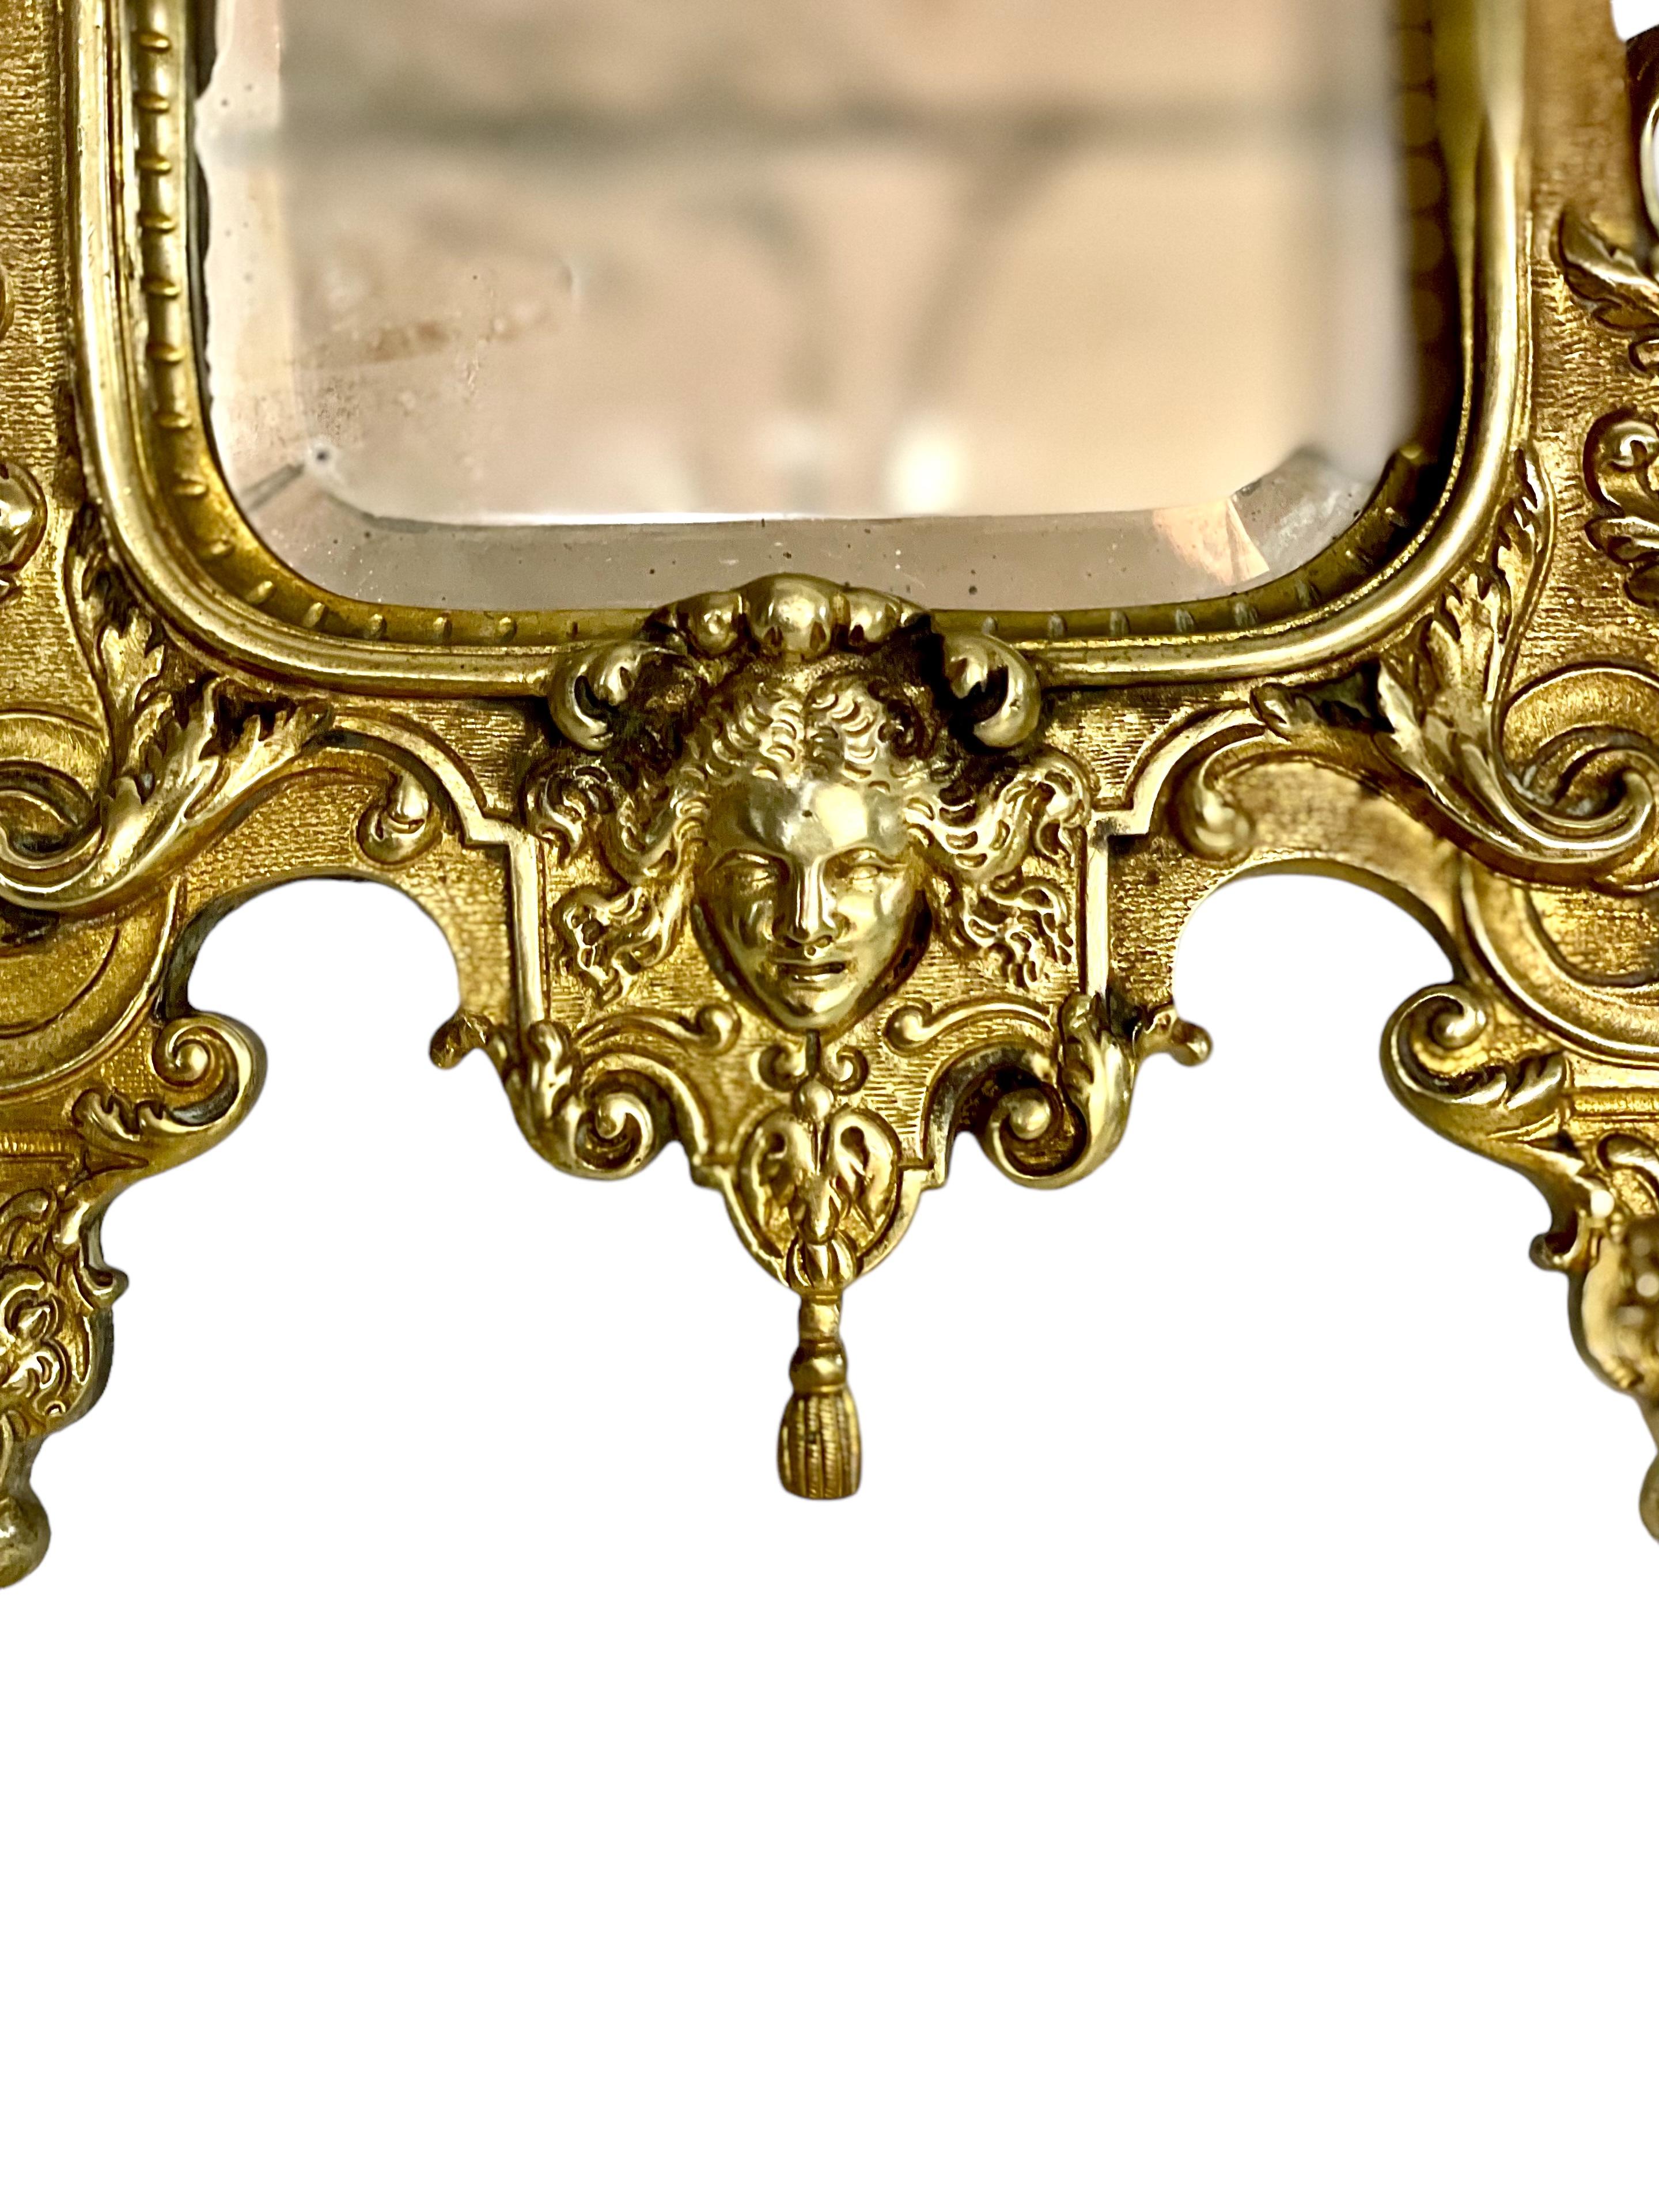 A petite but very impressive gilt bronze Rococo vanity mirror, dating from around 1900, and featuring ornately cast floral and foliage decoration around its frame. At the crest, a flower- filled urn is flanked by two flaming lamps, lapped by